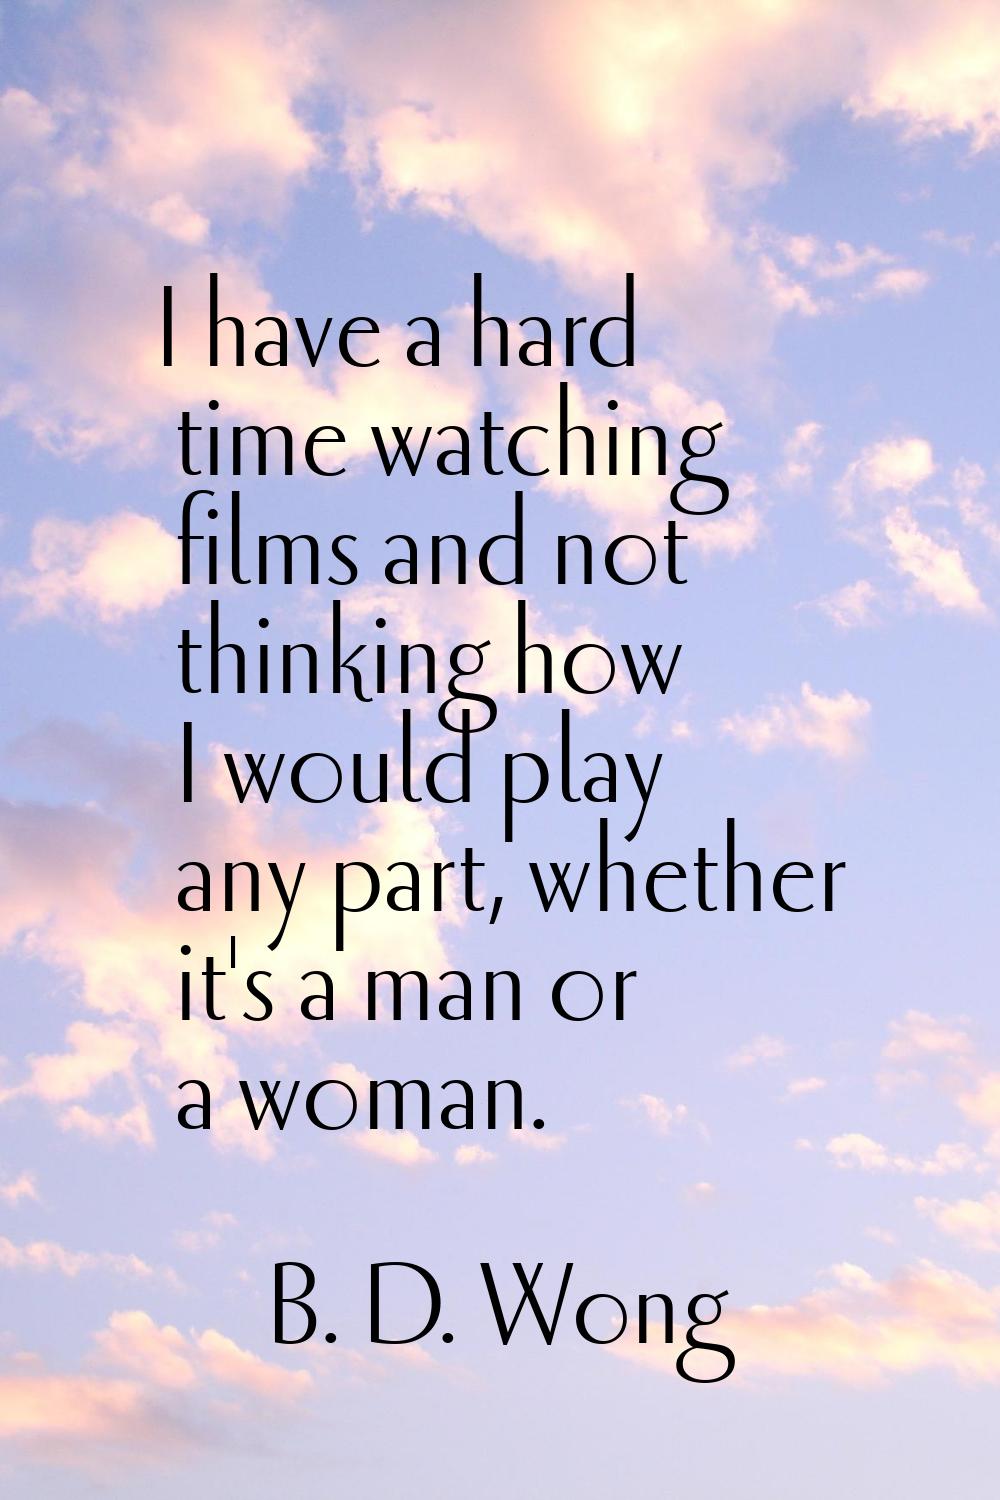 I have a hard time watching films and not thinking how I would play any part, whether it's a man or